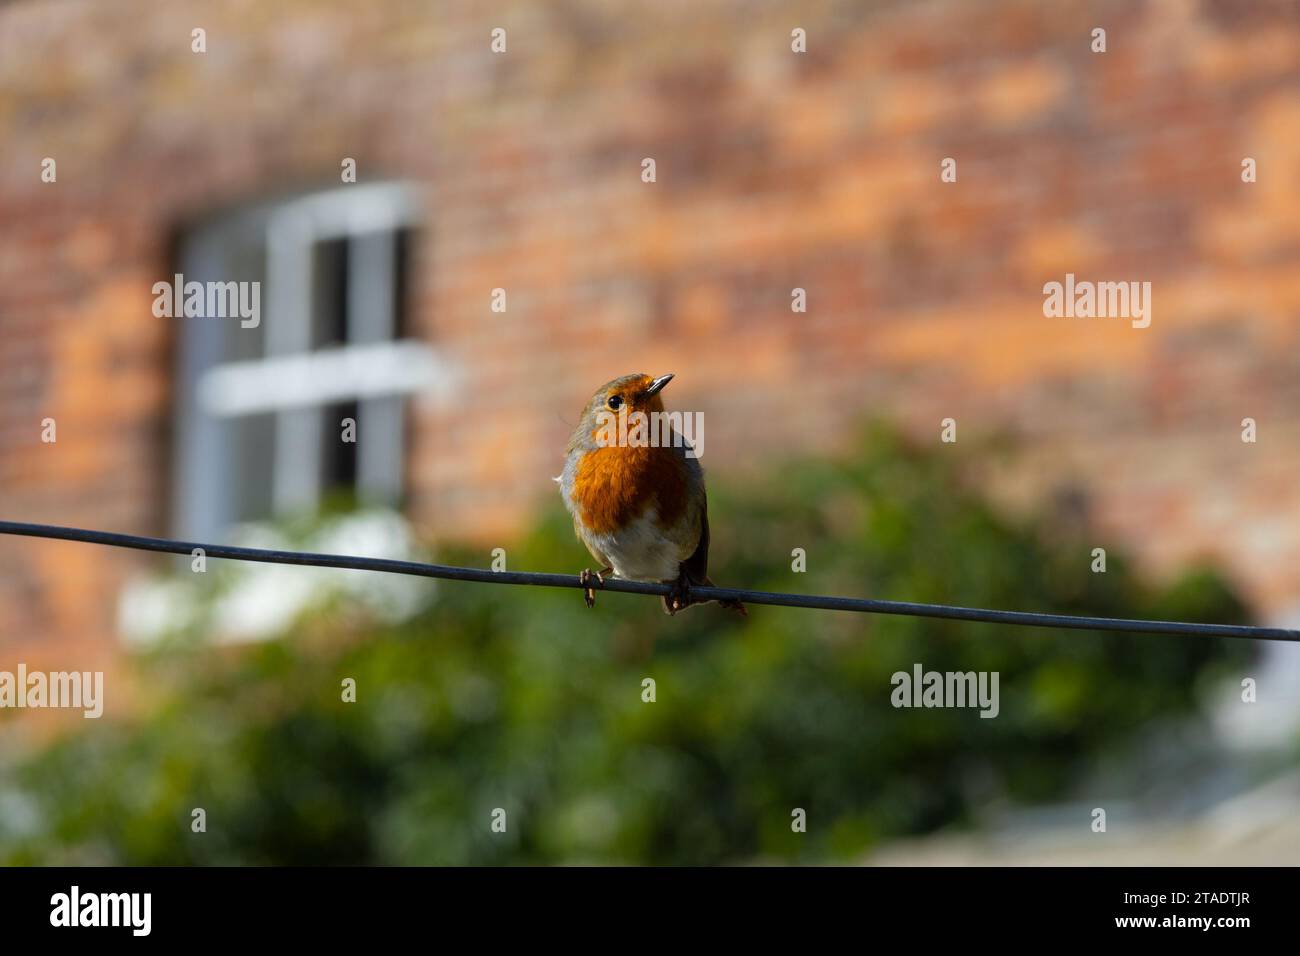 Red Robin perched on wire, kent, uk Stock Photo